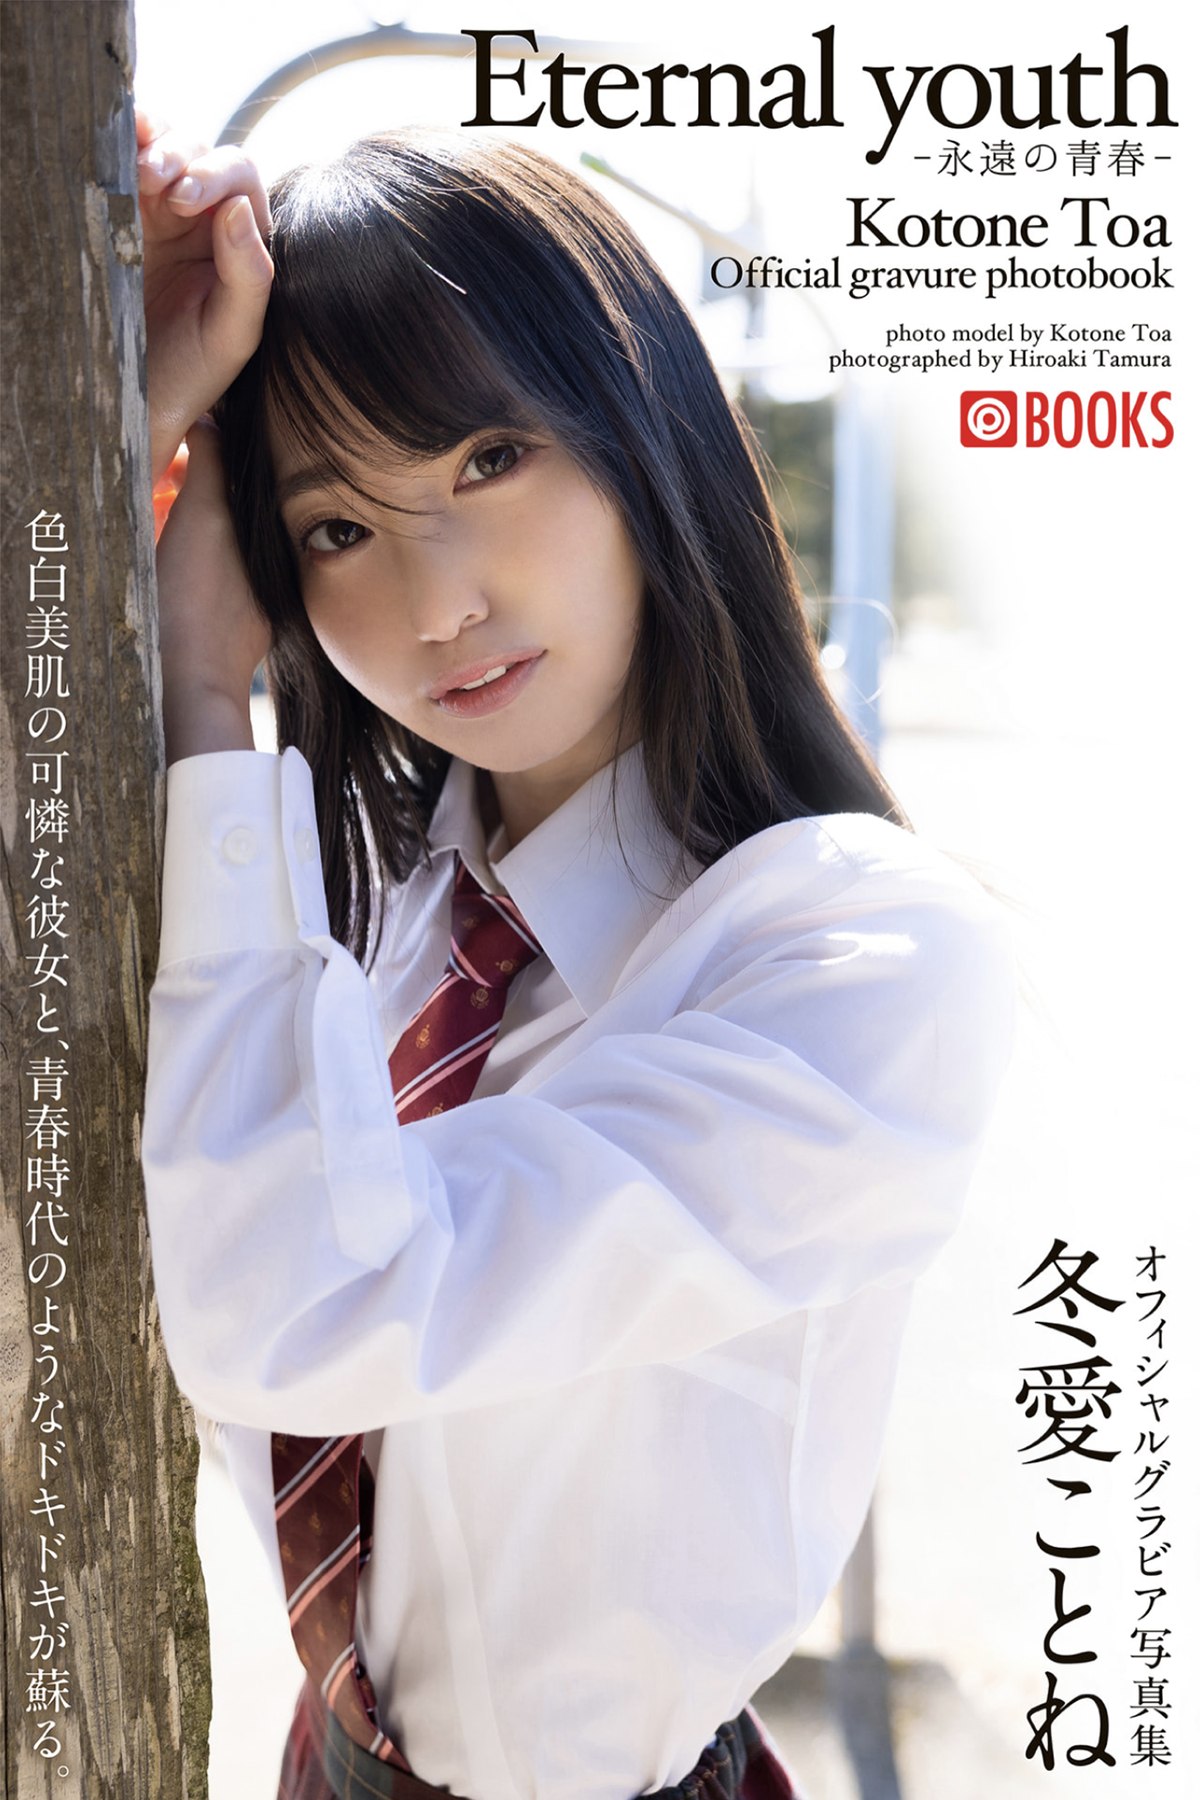 Photobook Toa Kotone 冬愛ことね – Ai Official Gravure Photo Book Eternal Youth Eternal Youth